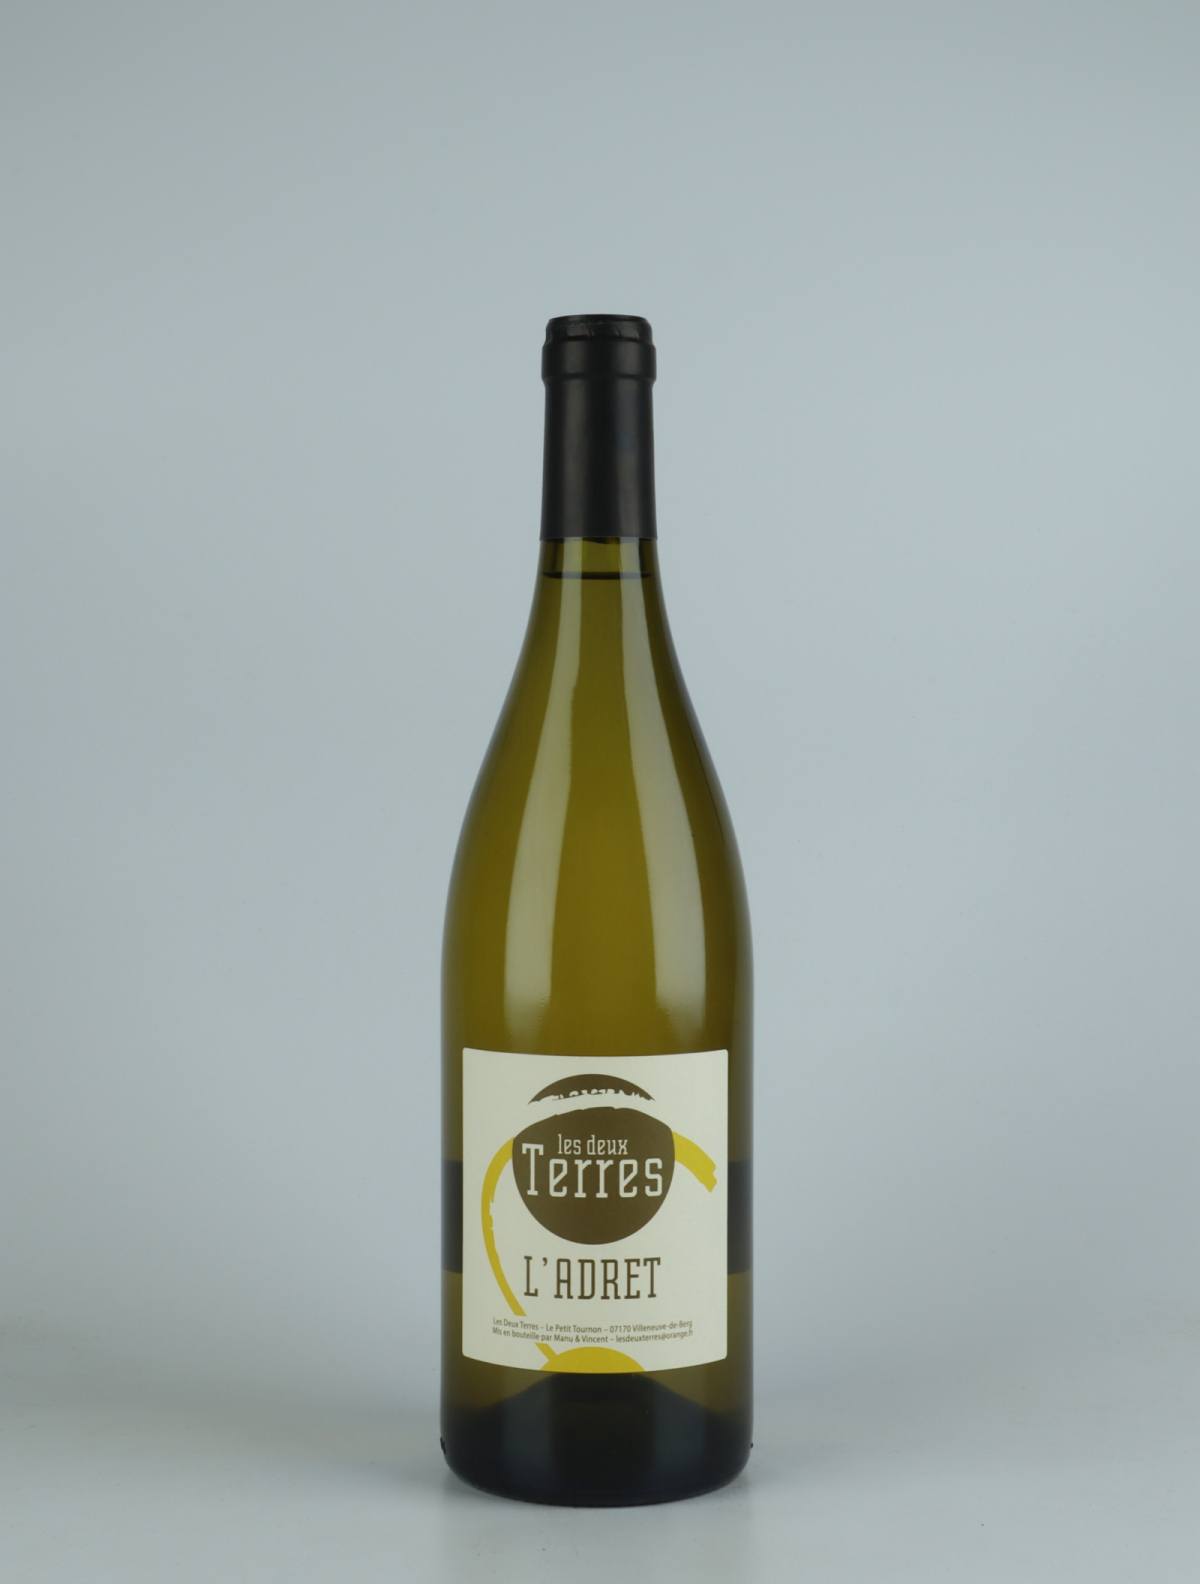 A bottle 2021 Adret White wine from Les Deux Terres, Ardèche in France